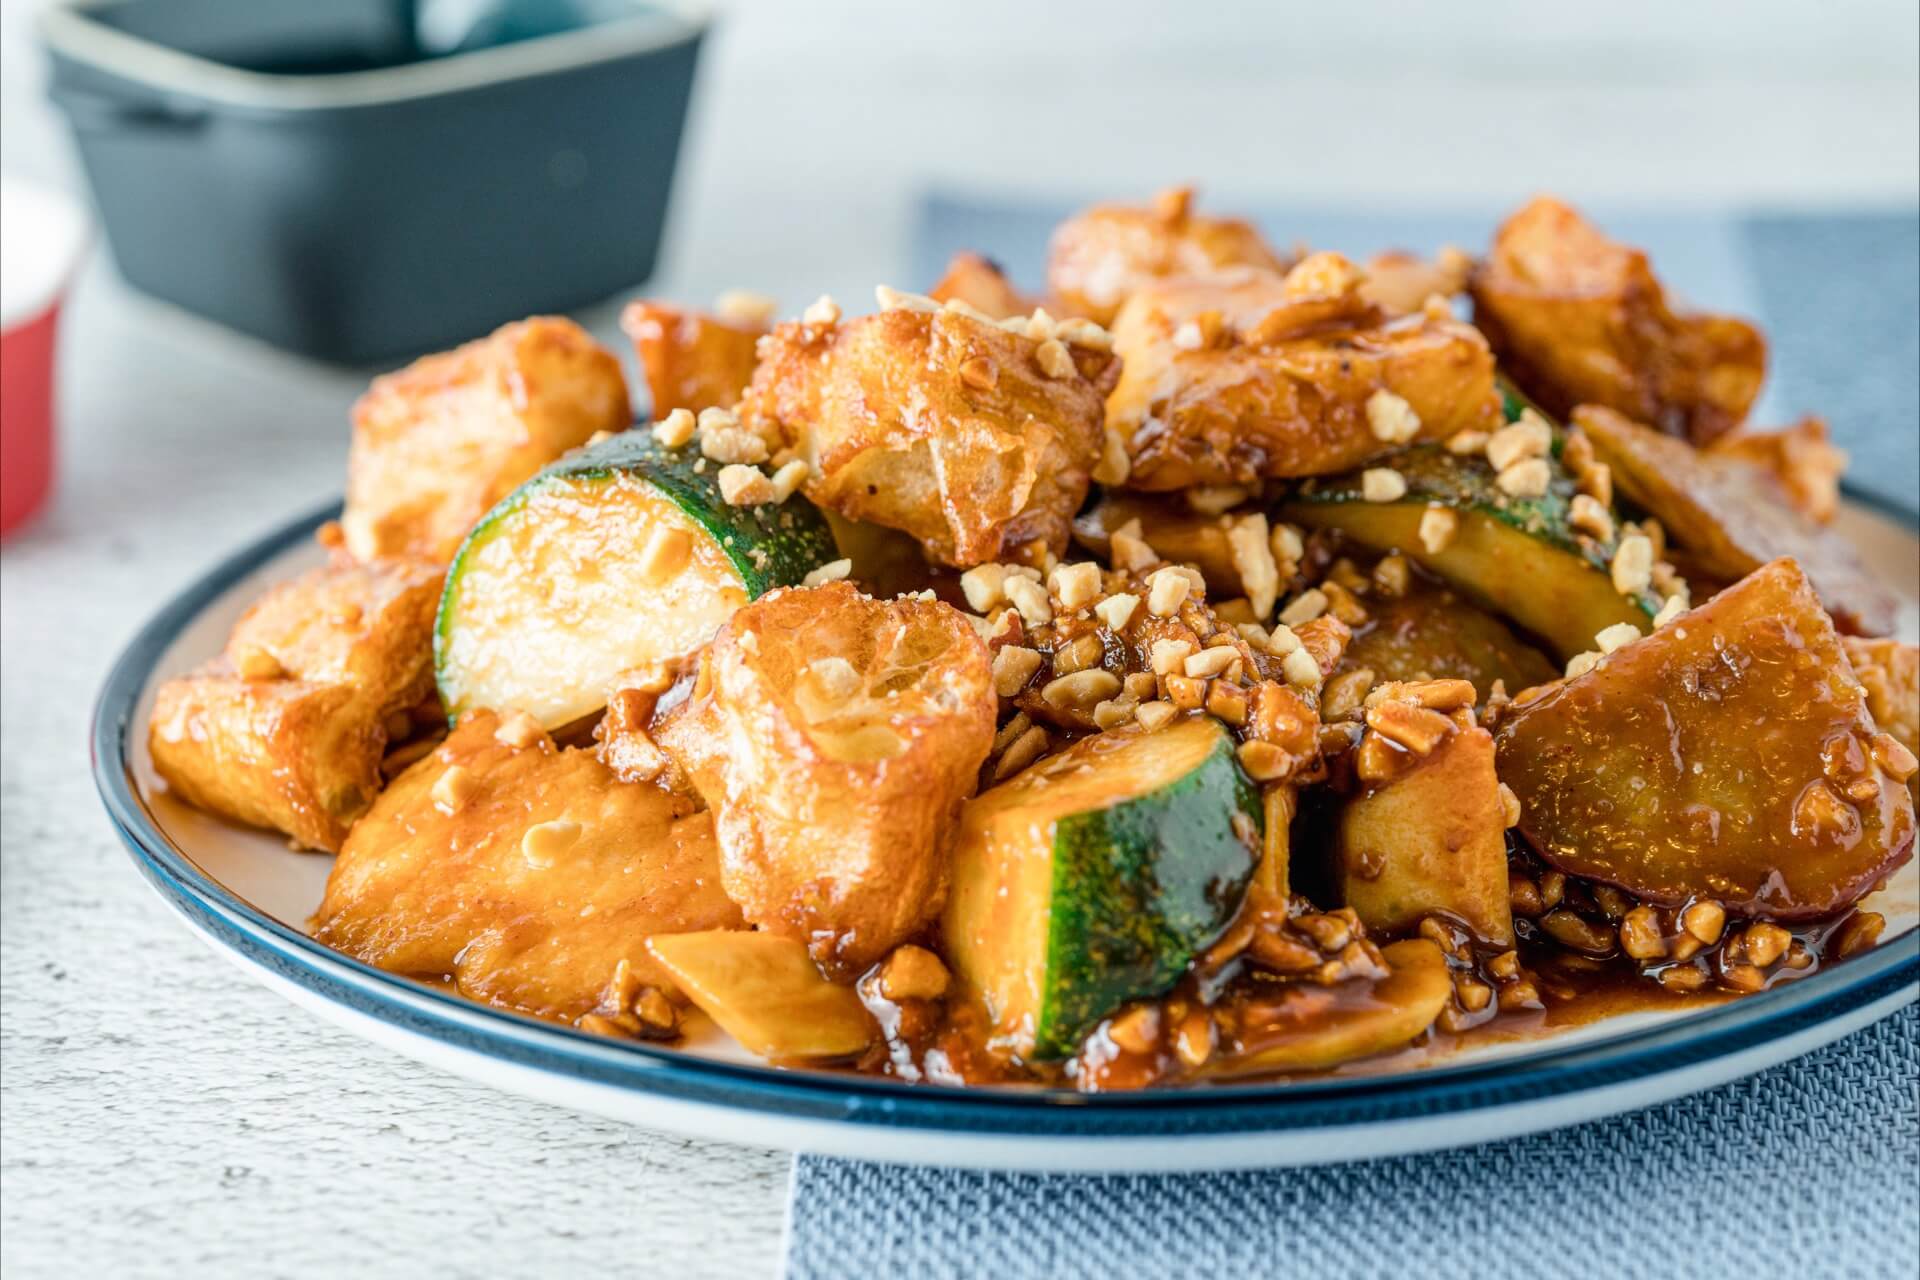 Here is where you can find the best rojak in all of KL and PJ